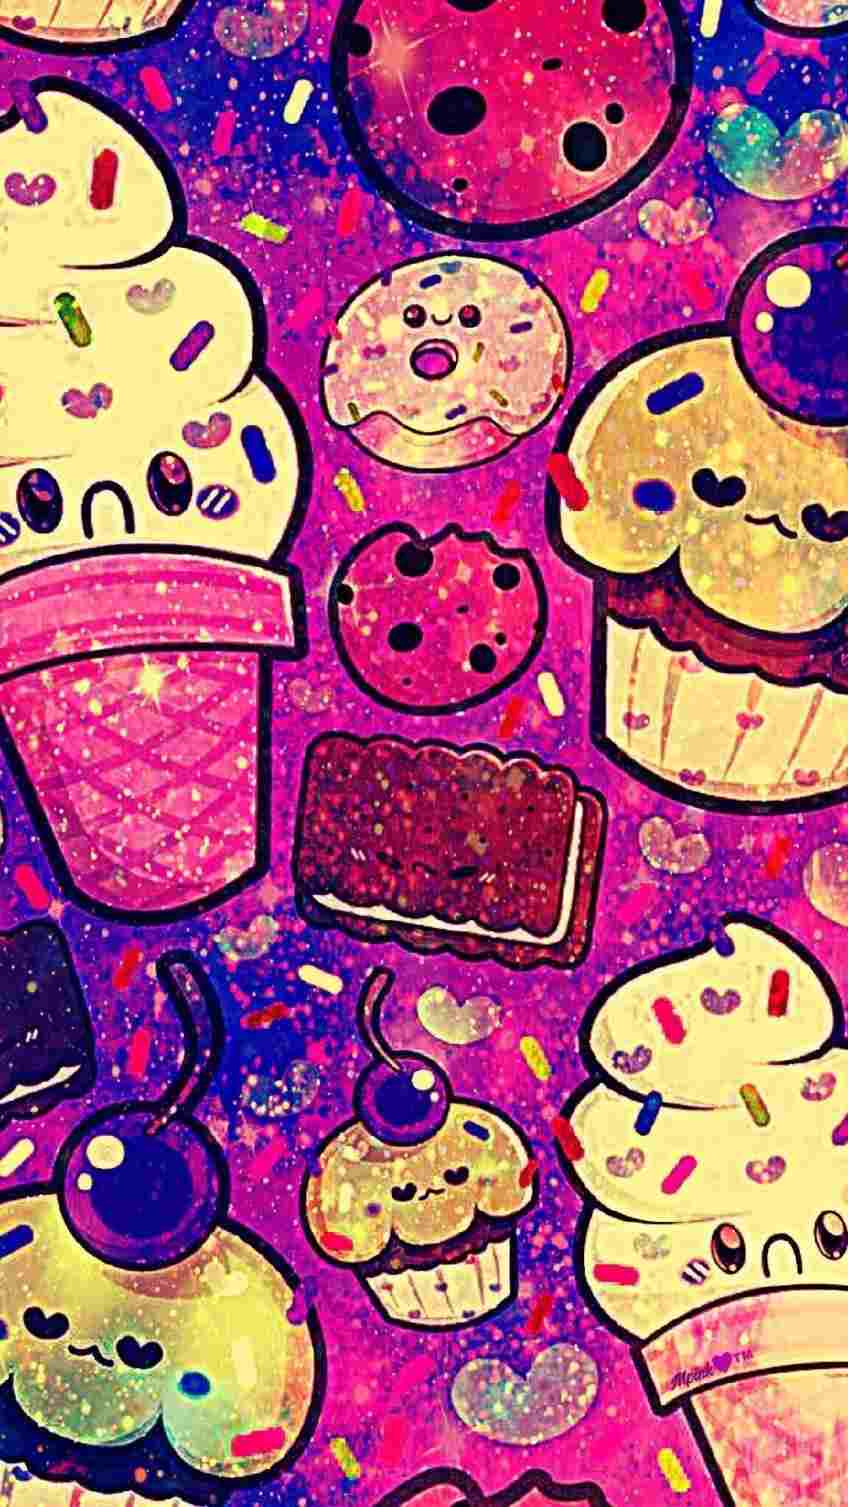 Wallpaper Androidwallpaper Iphonewallpaper Cute Galaxy Colorful